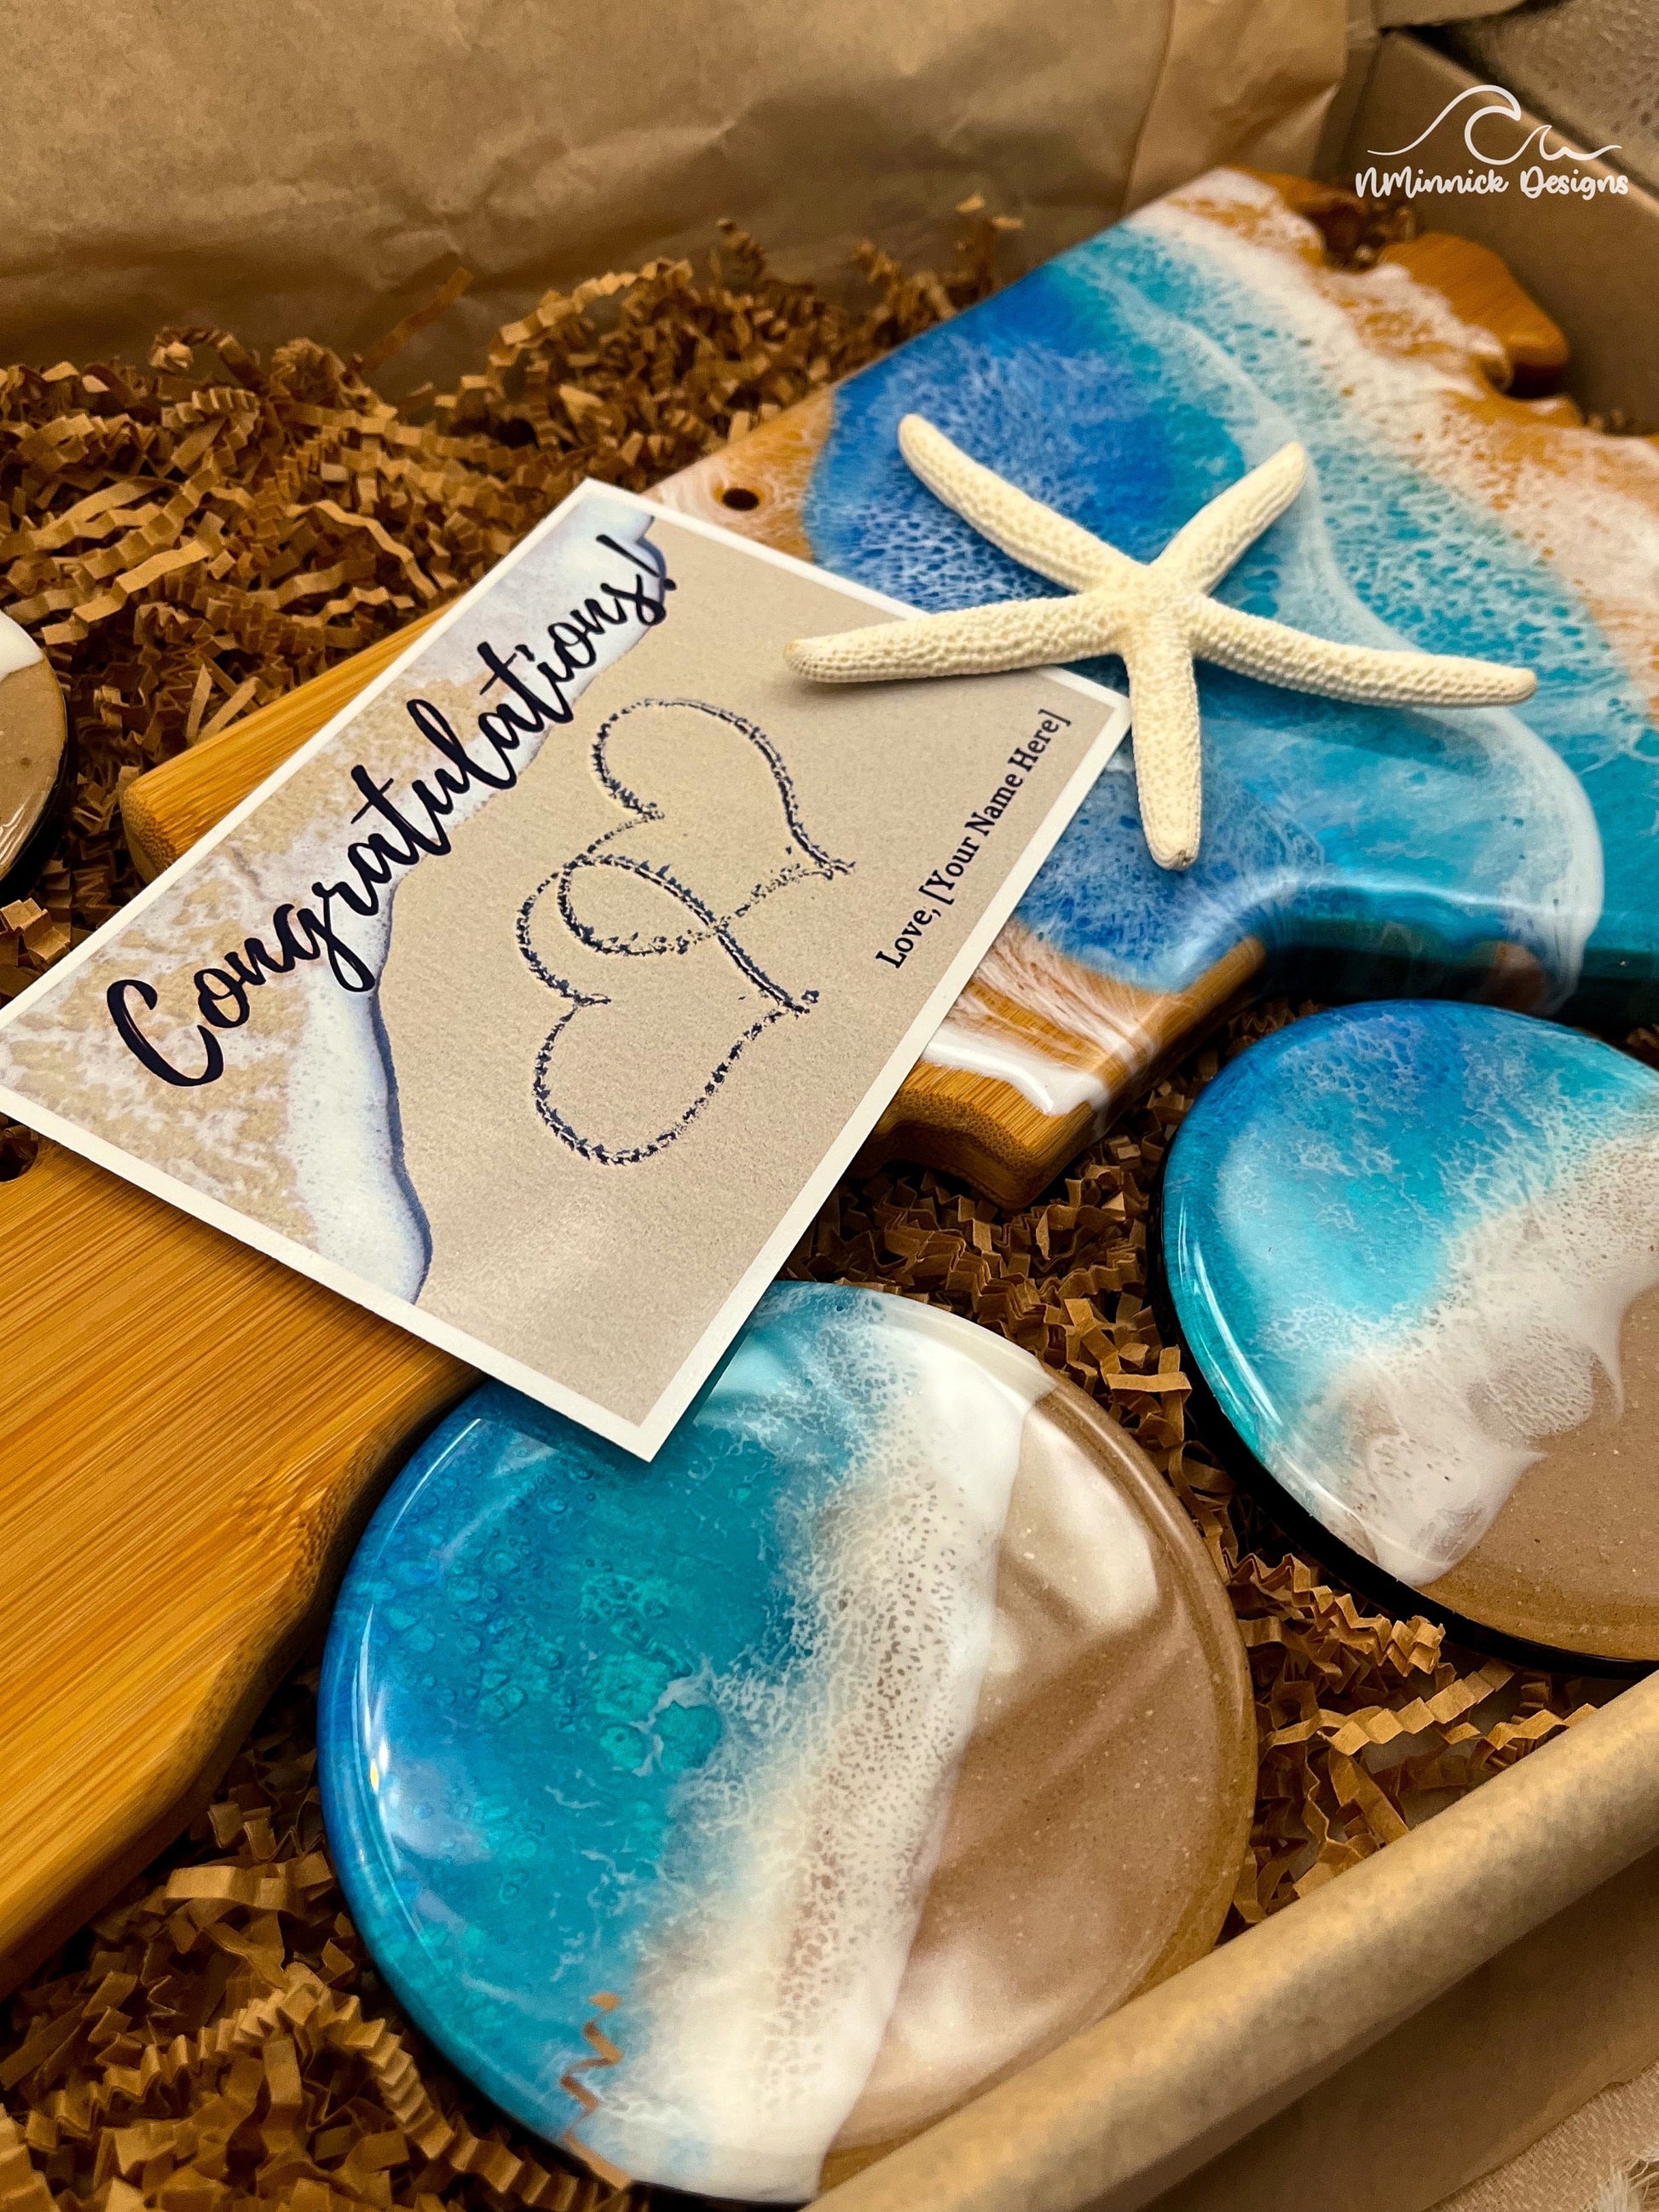 North Carolina-shaped bamboo charcuterie board half covered in blue and teal ocean resin art resembling the waves of the ocean. Matching set of 4 ocean resin art coasters with cork backings. Free congratulations card. Shown laying in a kraft colored eco-friendly plastic-free gift box.